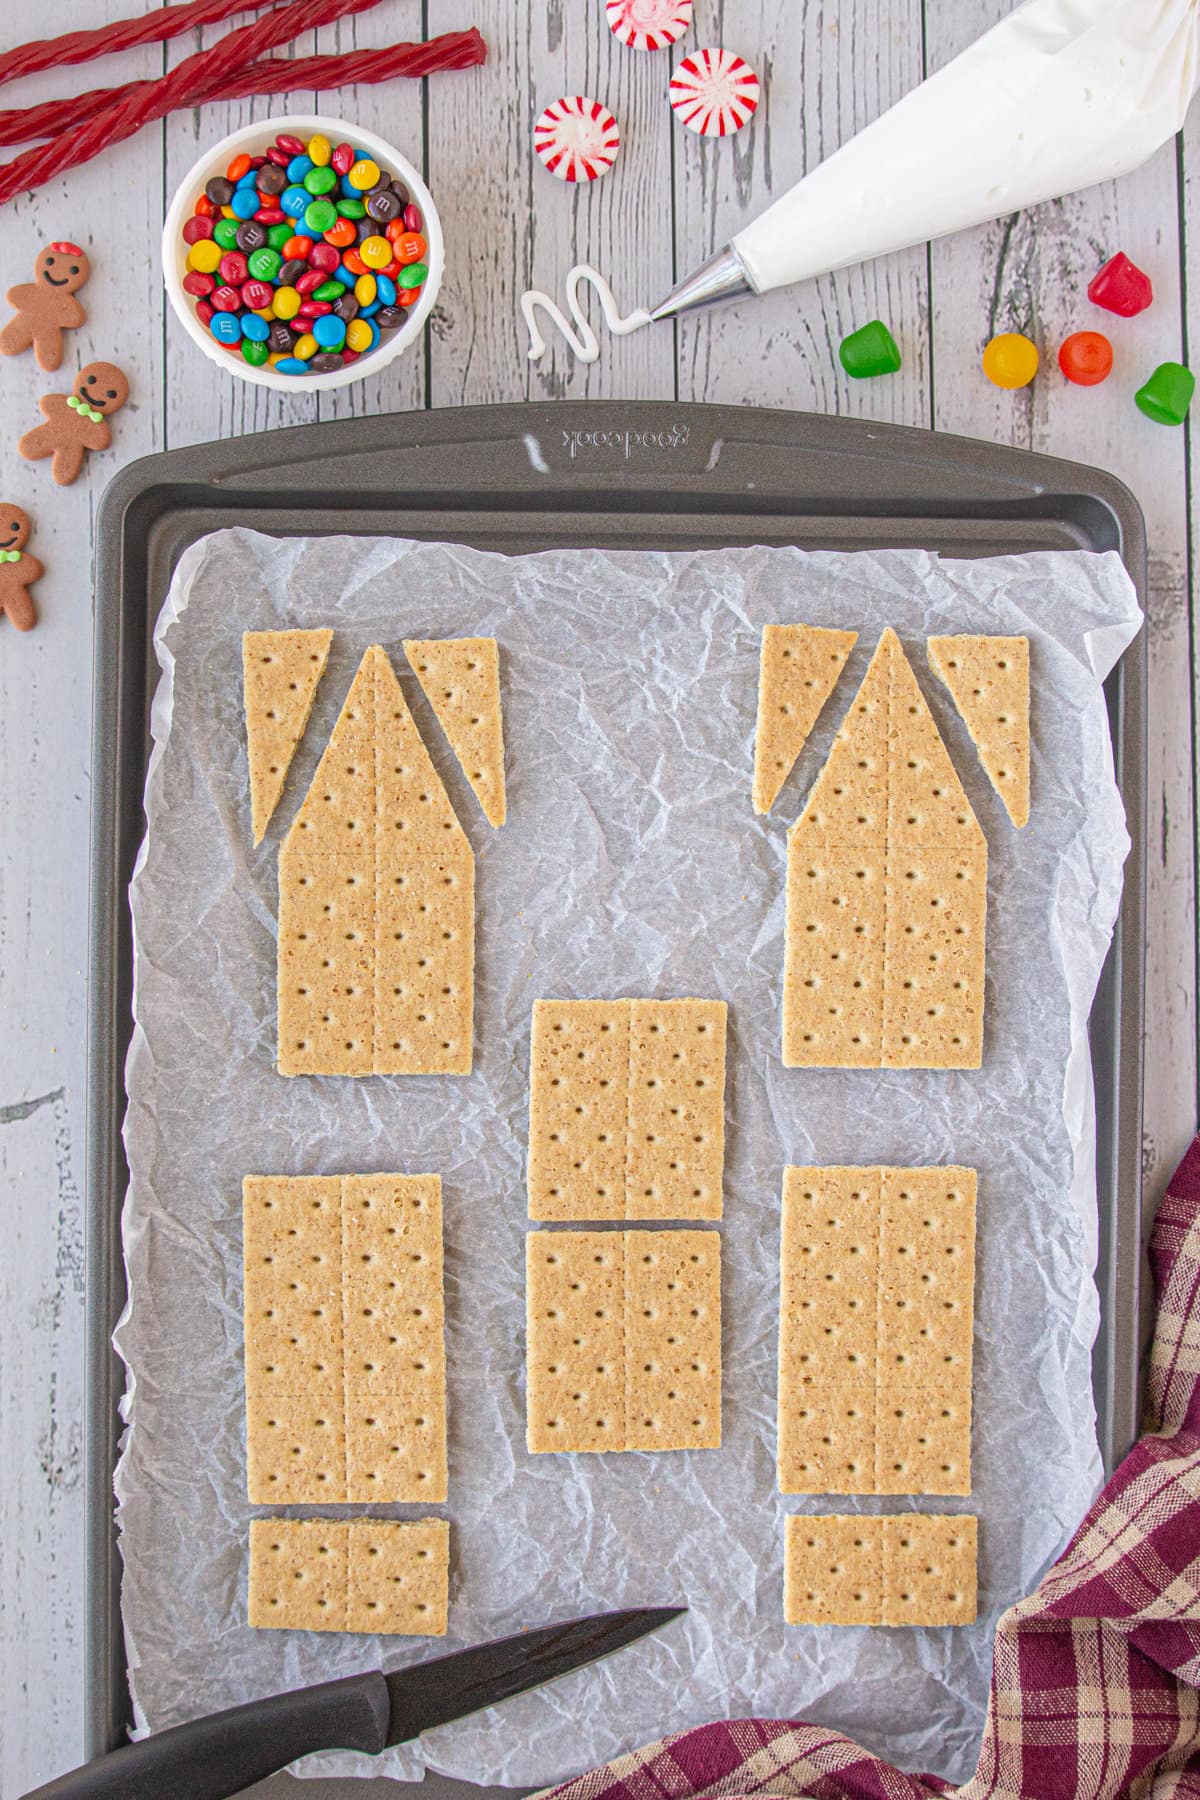 5 graham crackers cut in the shapes needed to build the gingerbread house.